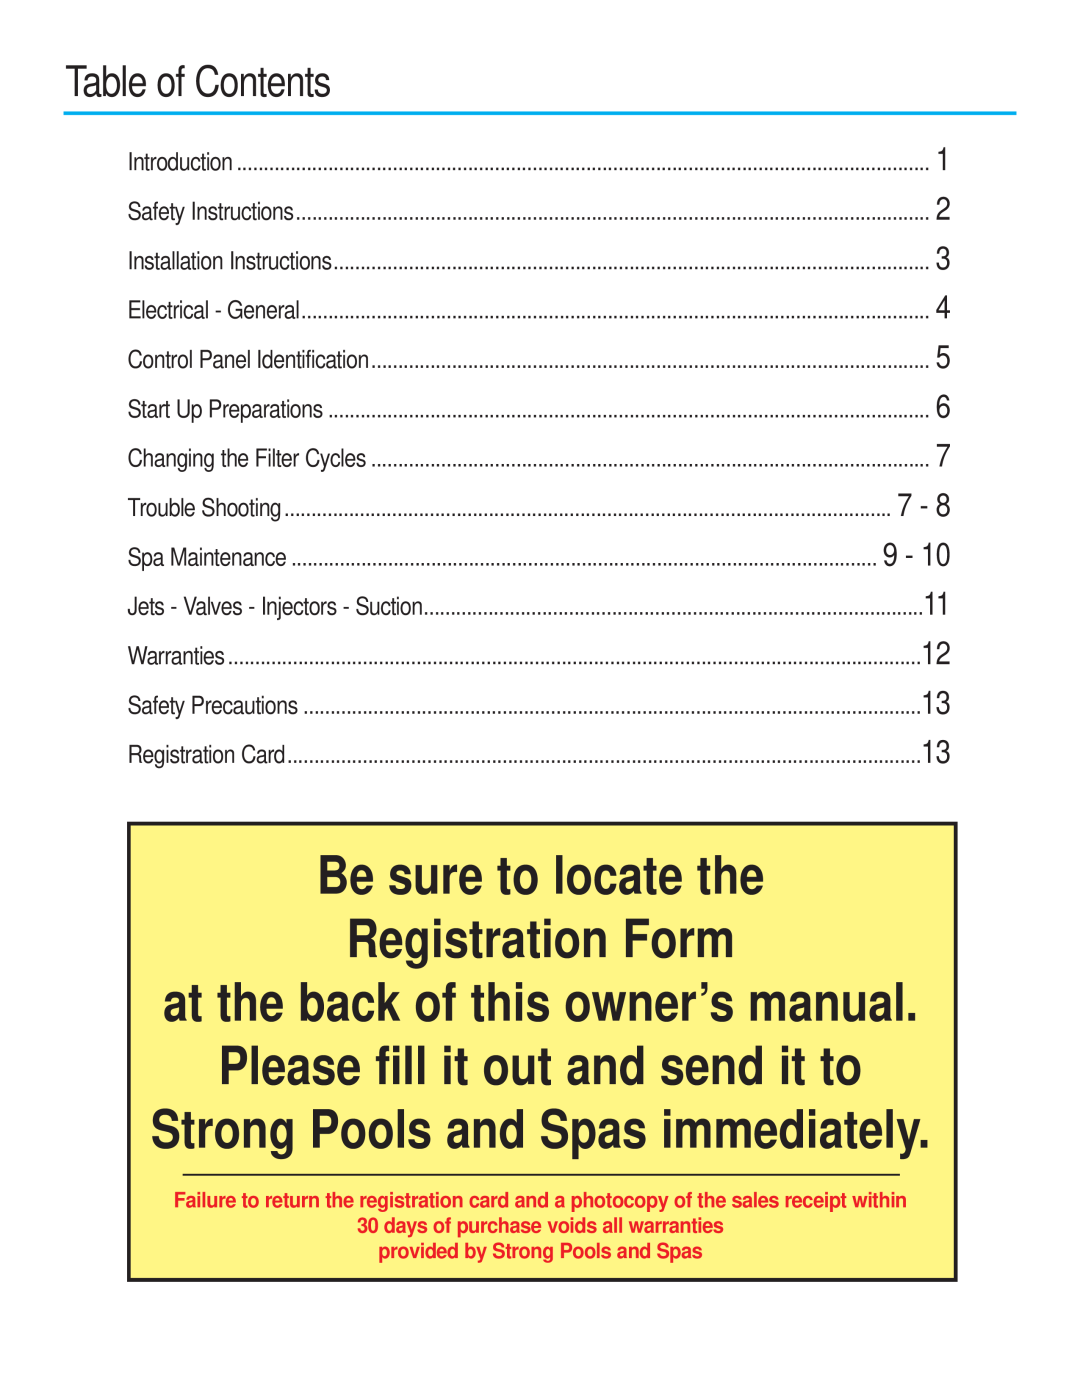 Strong Pools and Spas Rotational Molded resin whirlpool spa Table of Contents, days of purchase voids all warranties 